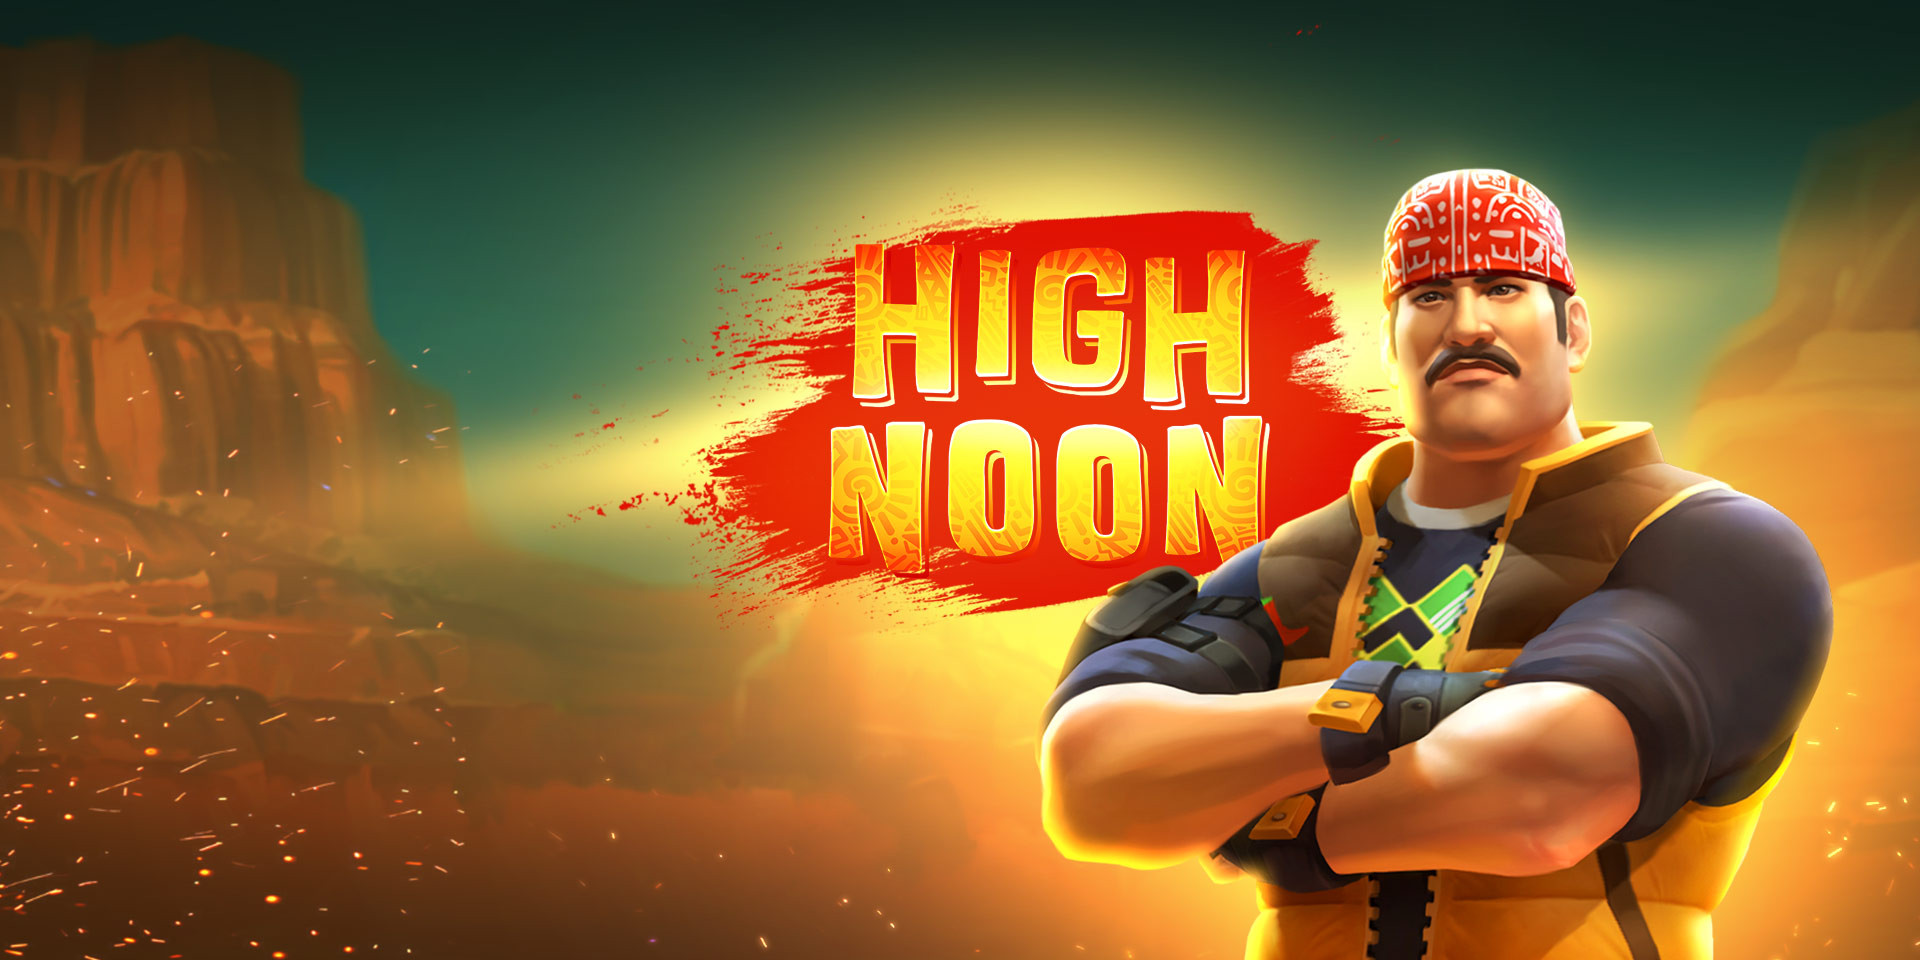 high-noon-event-its-free-for-all-Xx5Gyar7xY